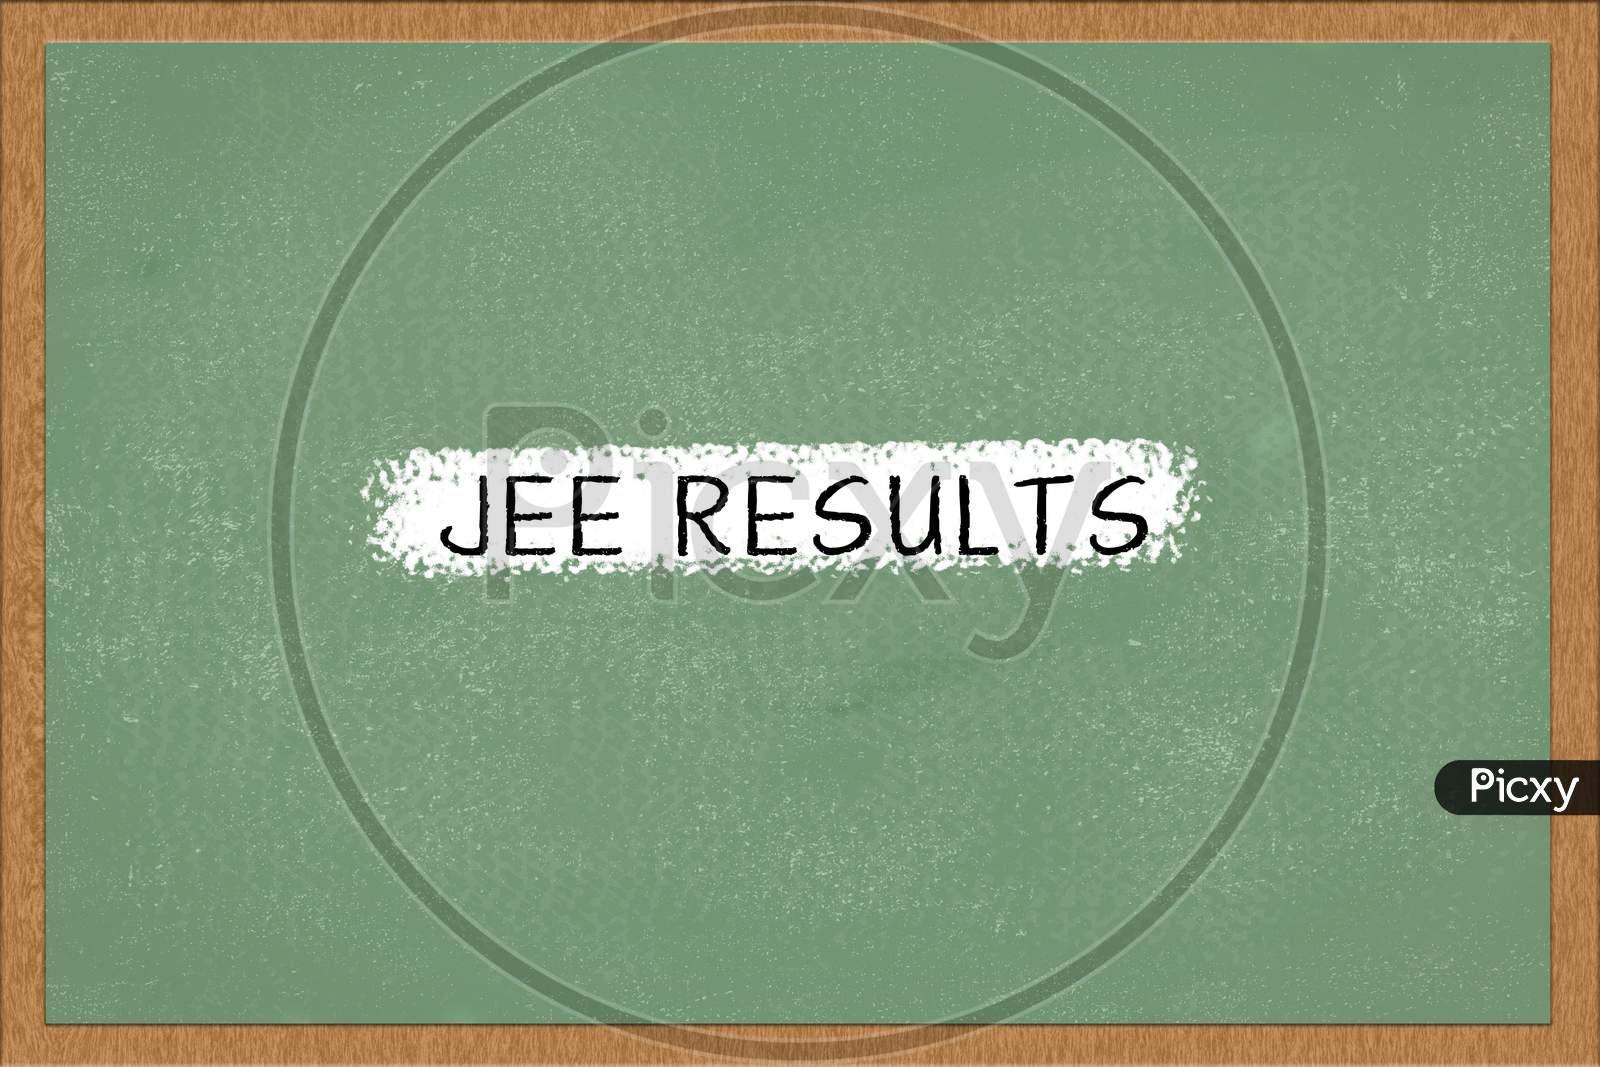 Joint Entrance Examination or JEE Results Written On Green Board